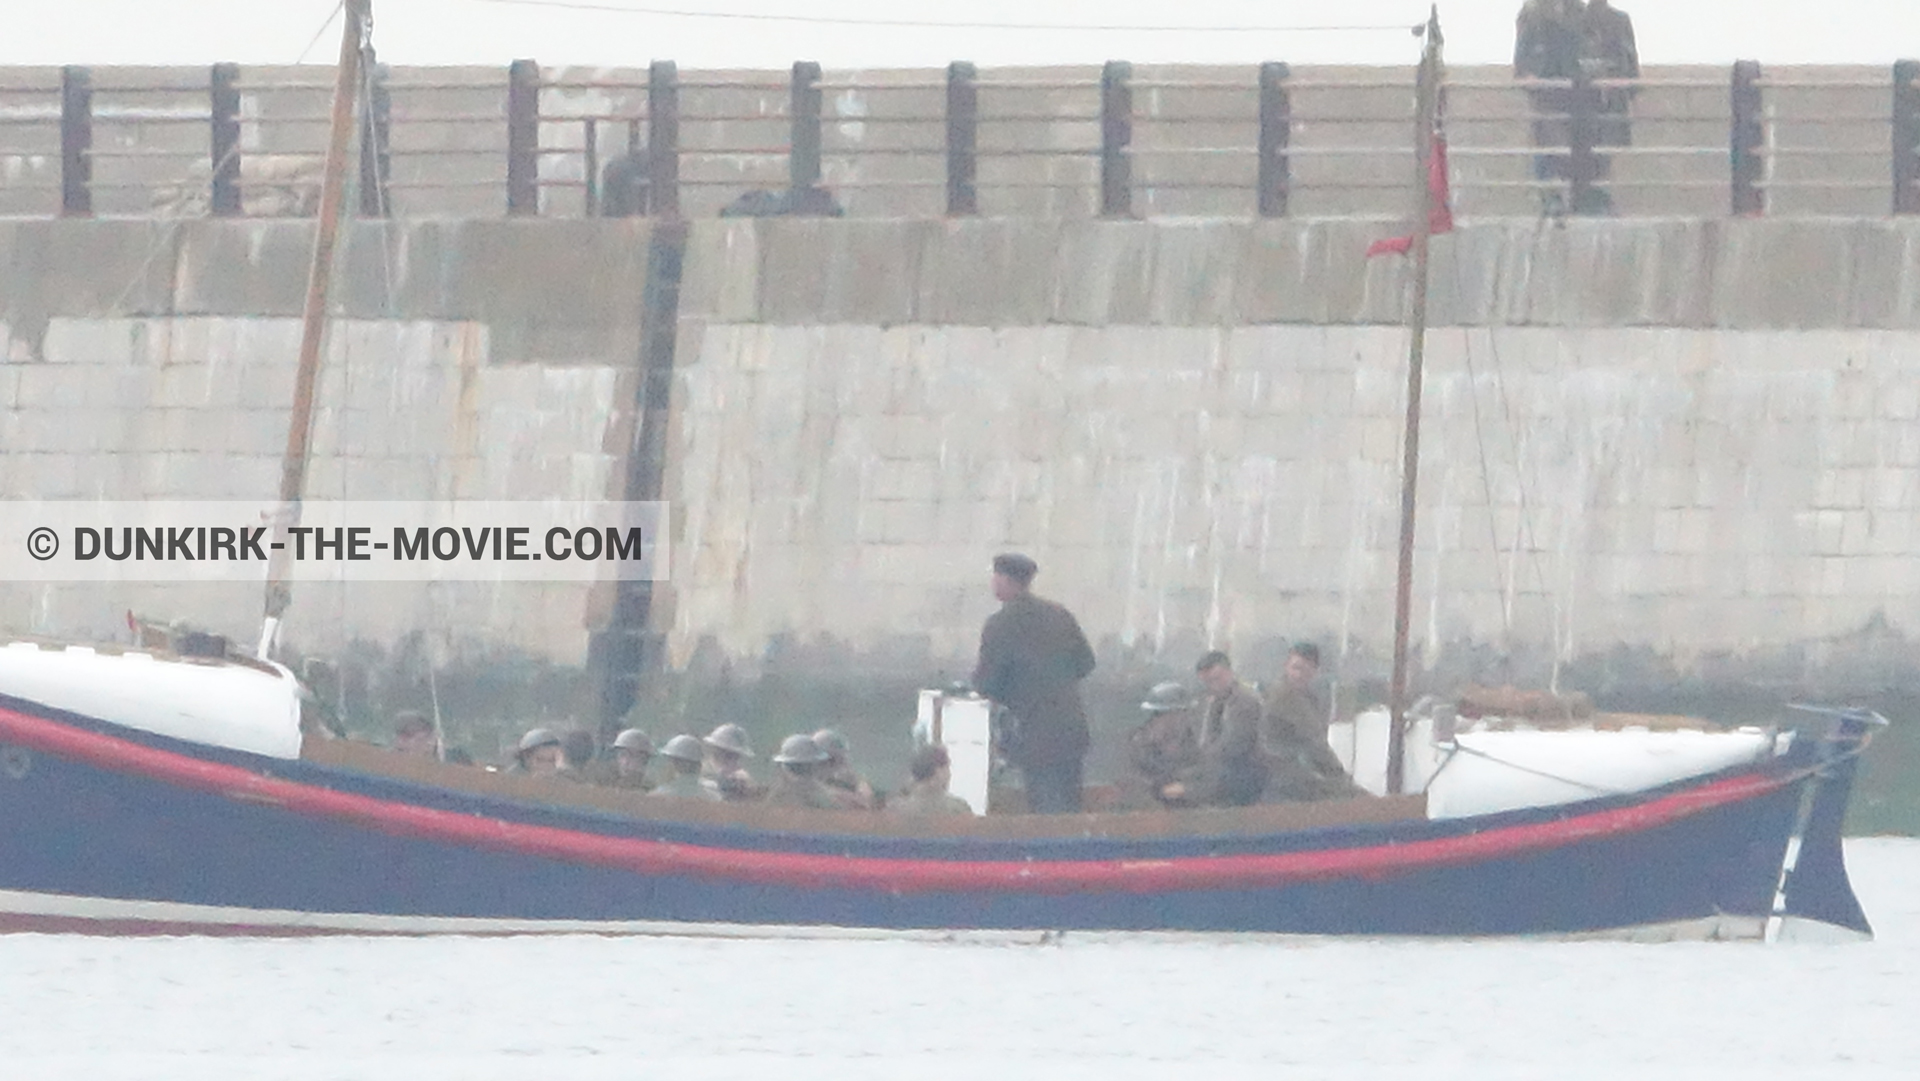 Picture with boat, supernumeraries, EST pier, Henry Finlay lifeboat,  from behind the scene of the Dunkirk movie by Nolan